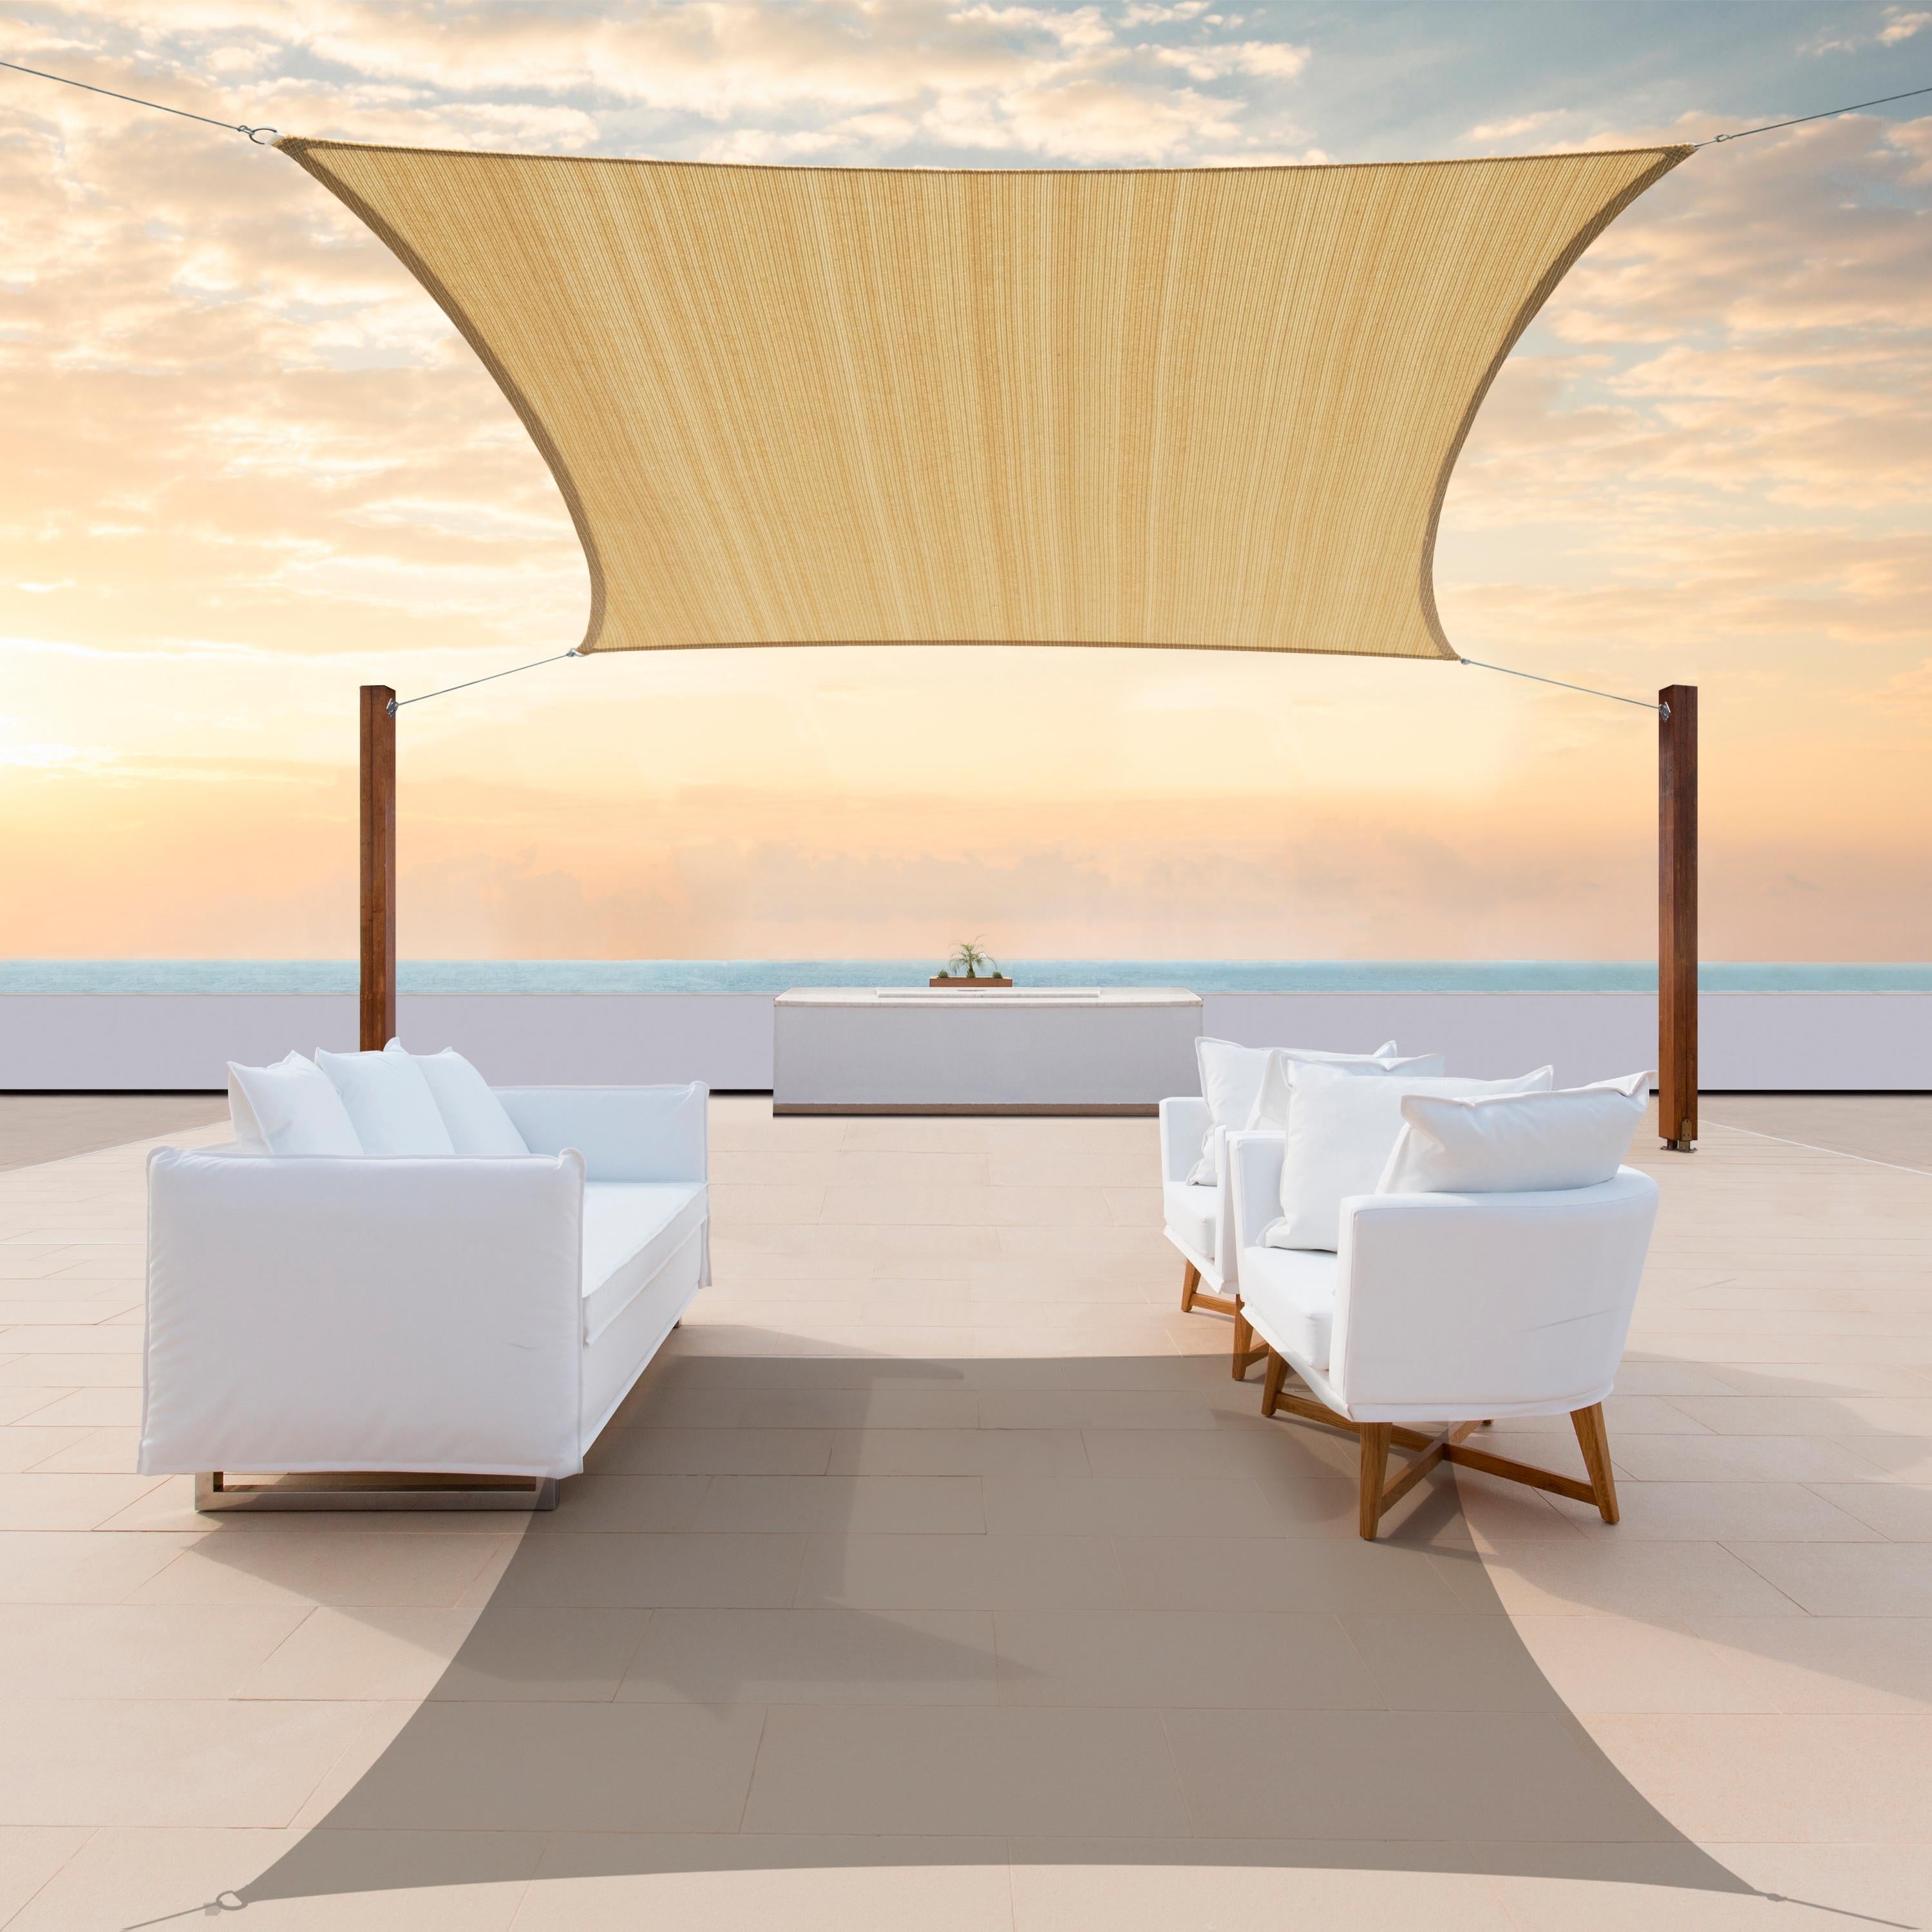 Rectangle Sun Shade Sail Canopy, Commercial Grade, 14 Sizes, 7 Colors Sun Shade Sail Colourtree 16' x 20' Beige 